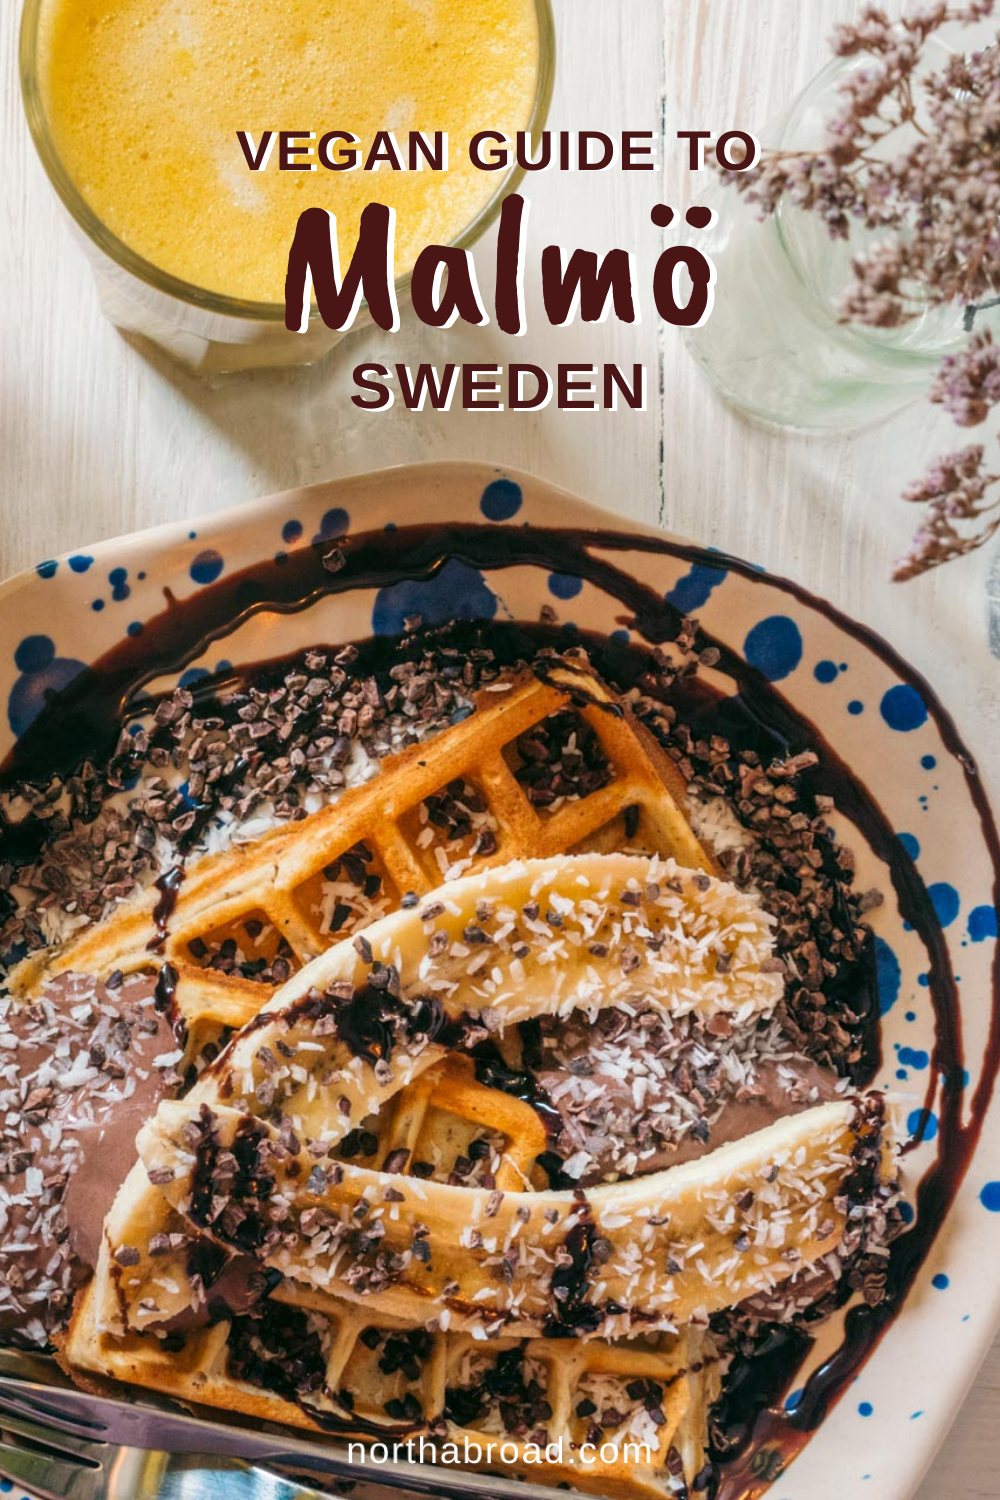 Everything you need to know about finding the most delicious vegan and vegetarian places in Malmö, Sweden